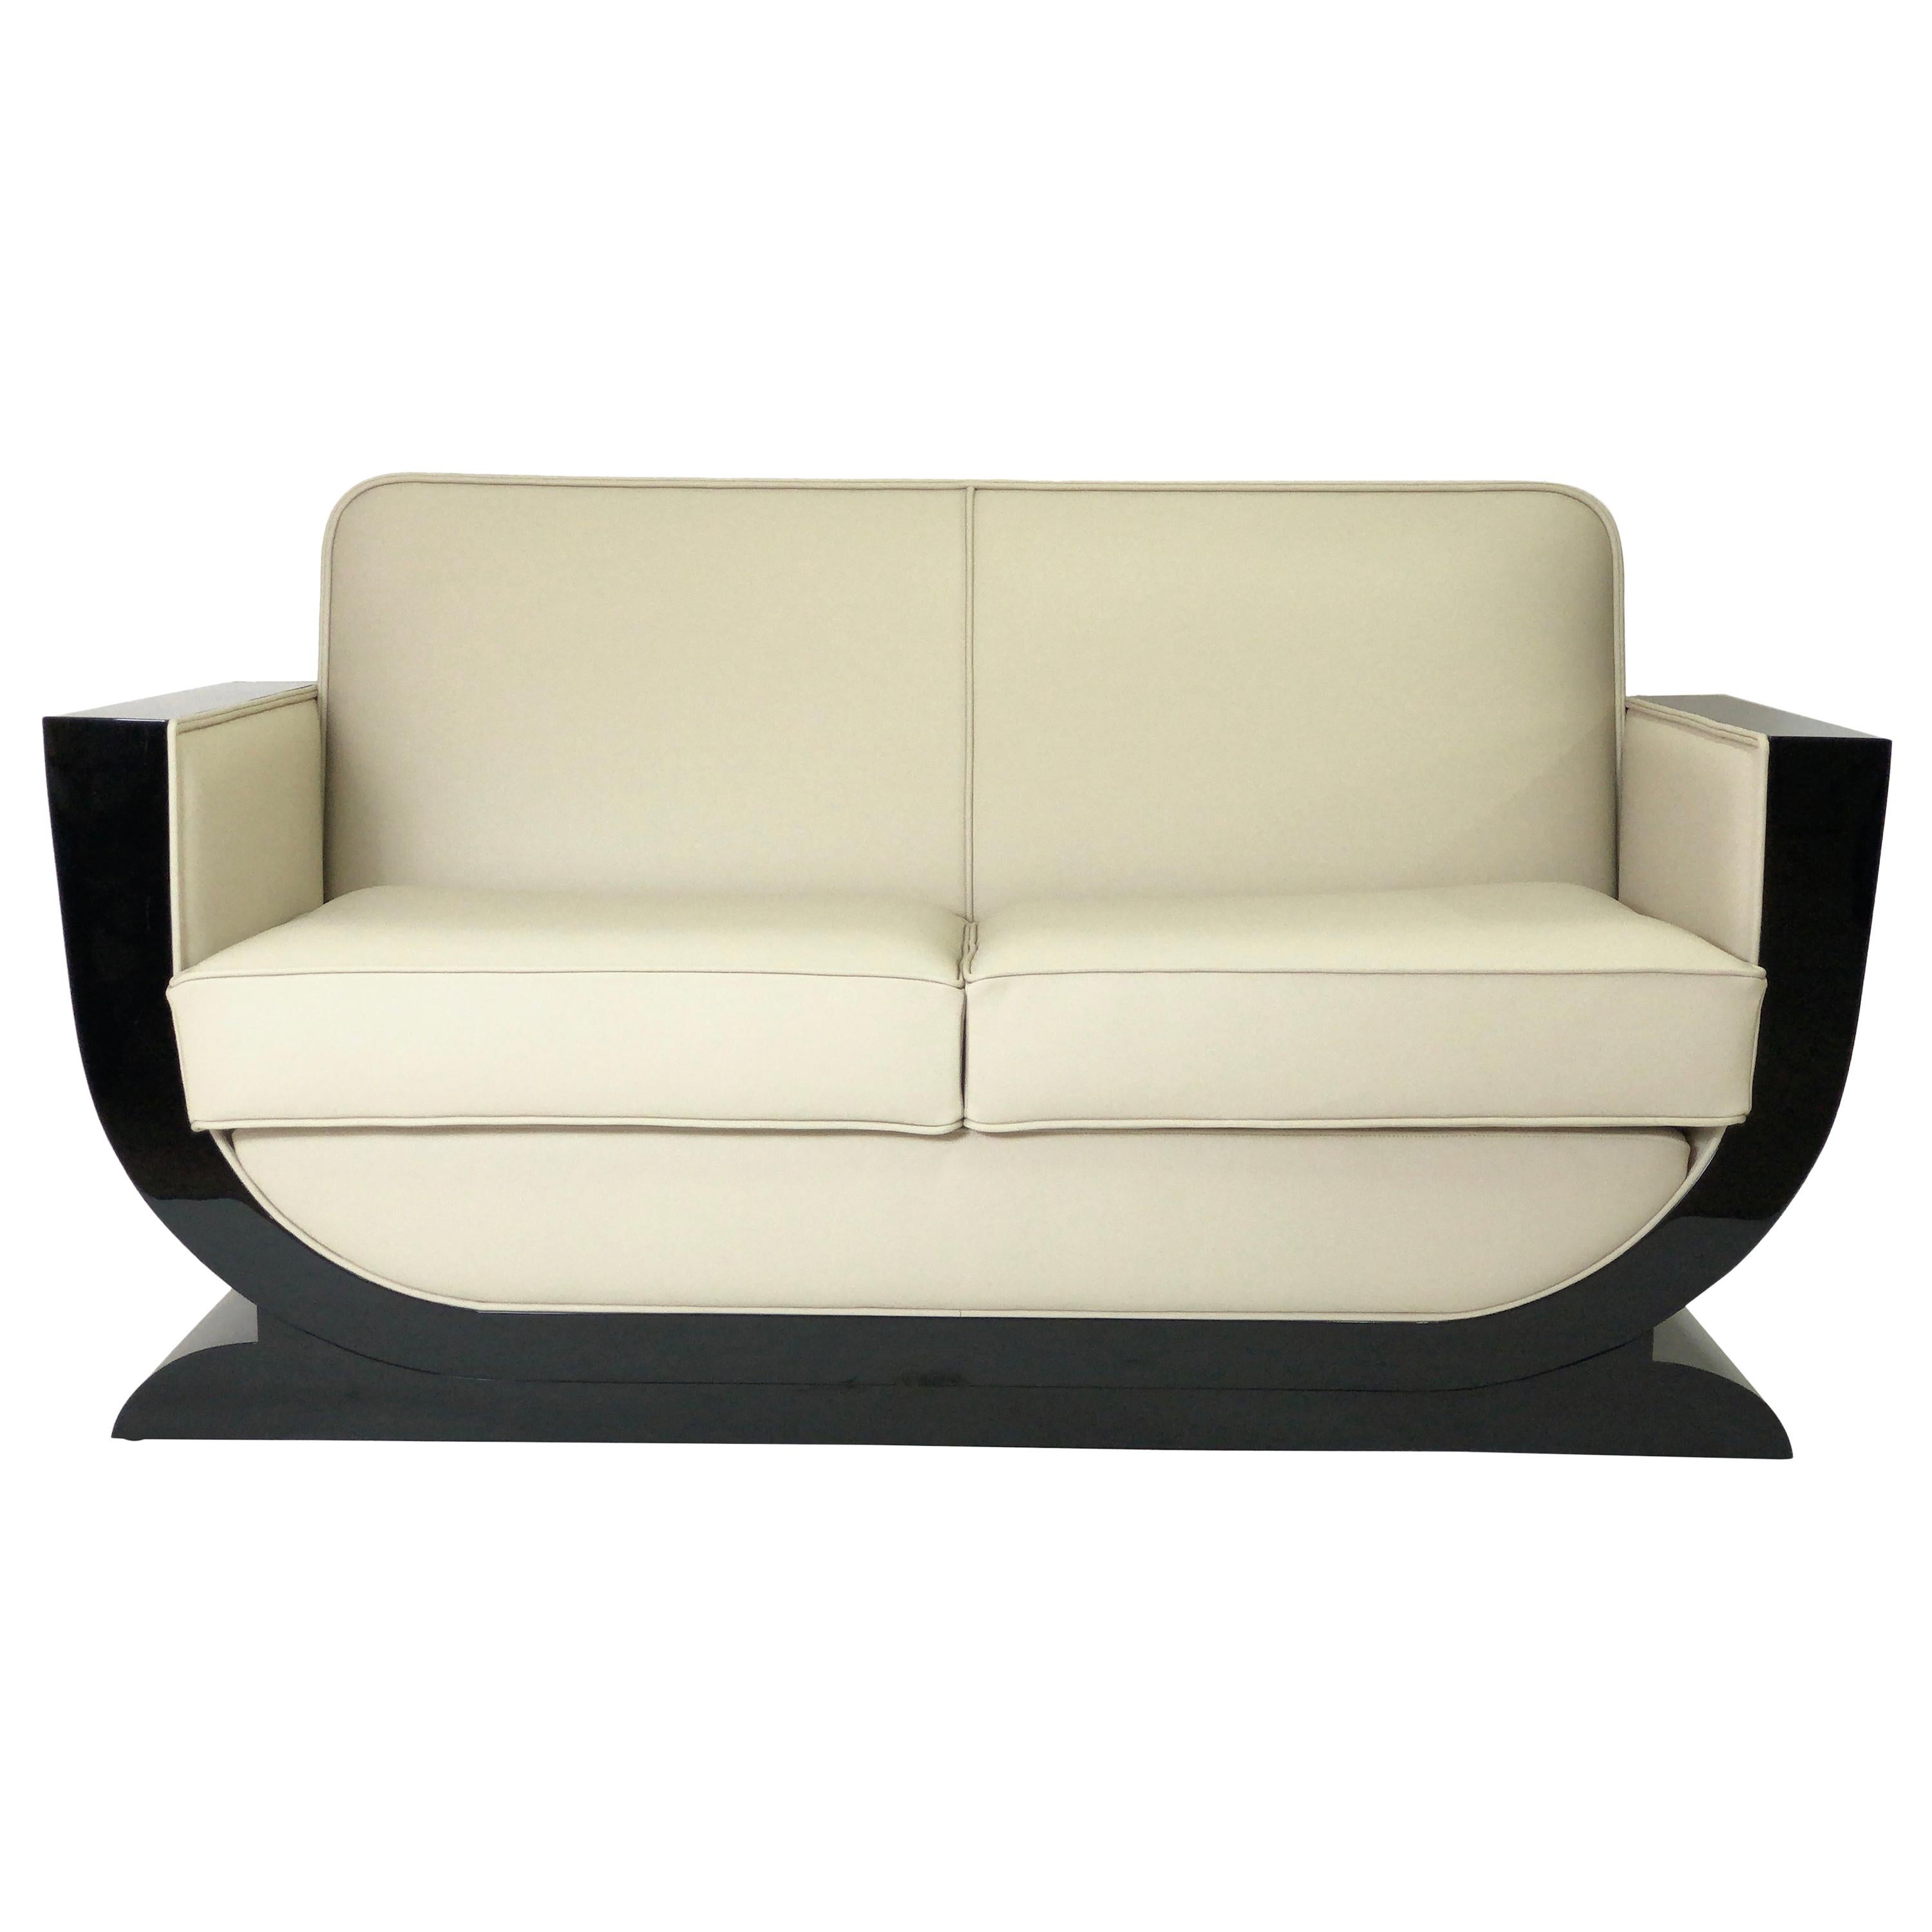 U-Shaped Black and White Art Deco Style Couch with Black Piano Lacquer